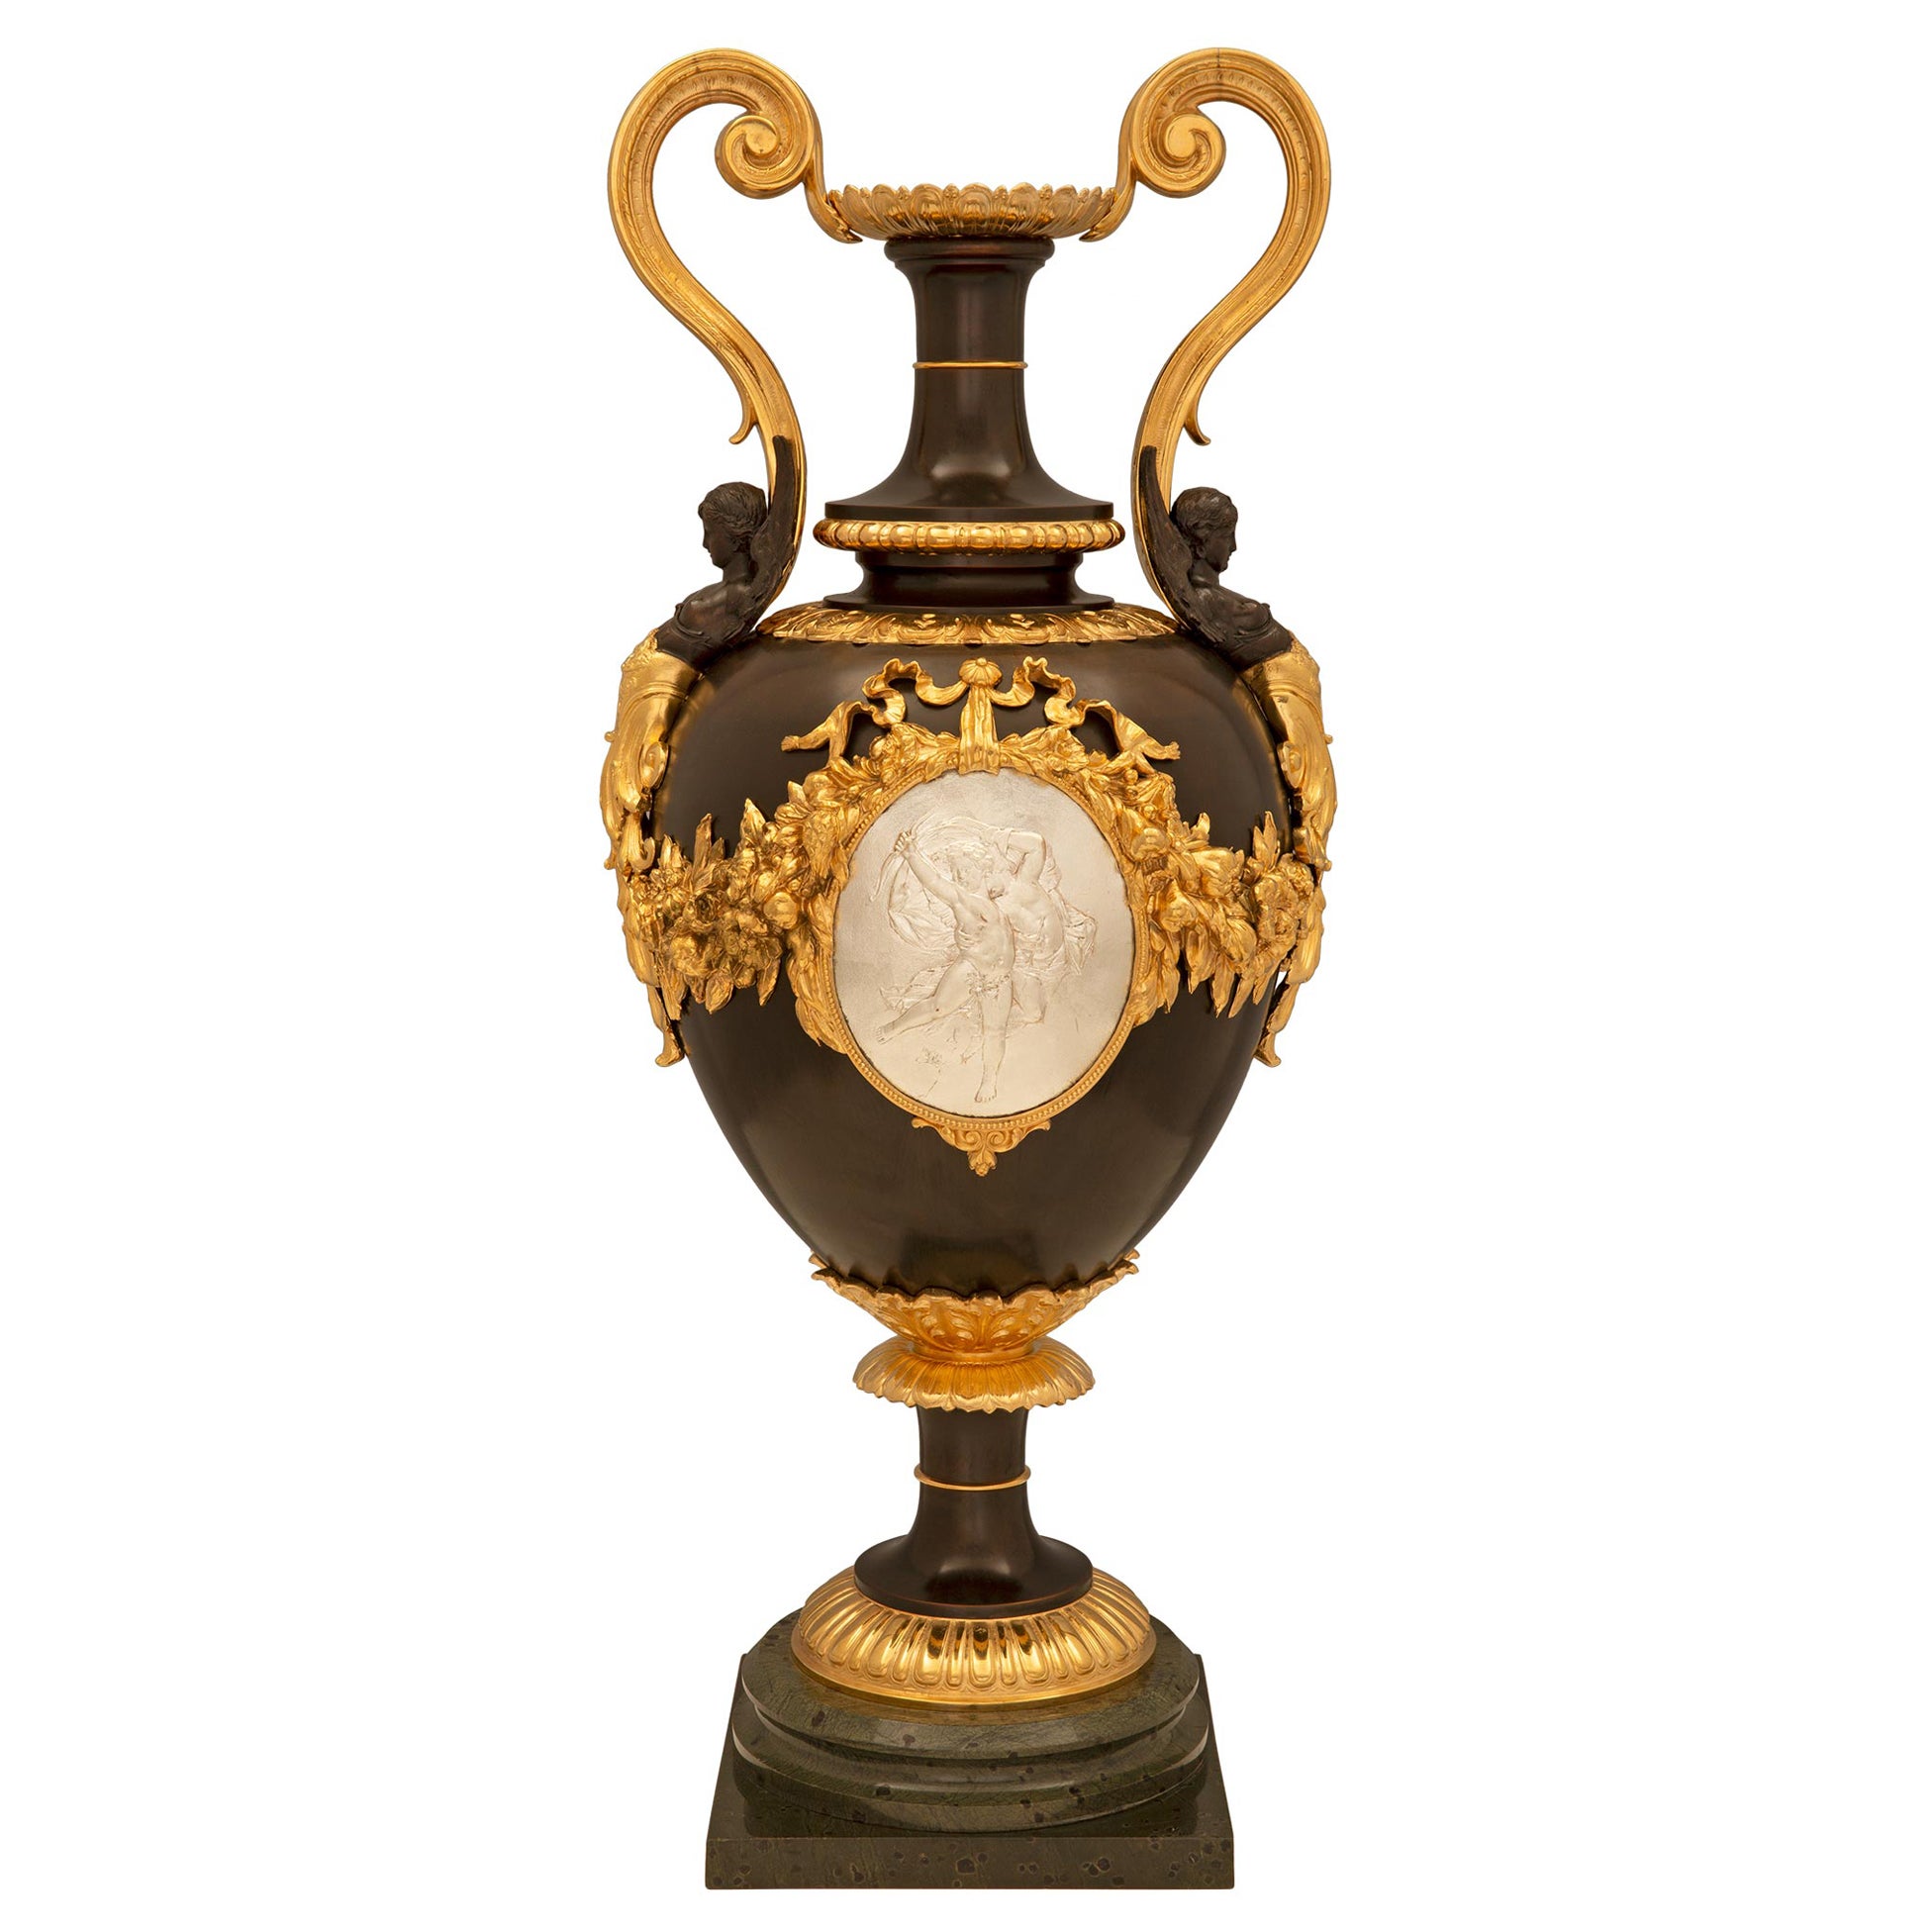 French, 19th Century, Belle Époque Period Bronze and Ormolu Urn For Sale